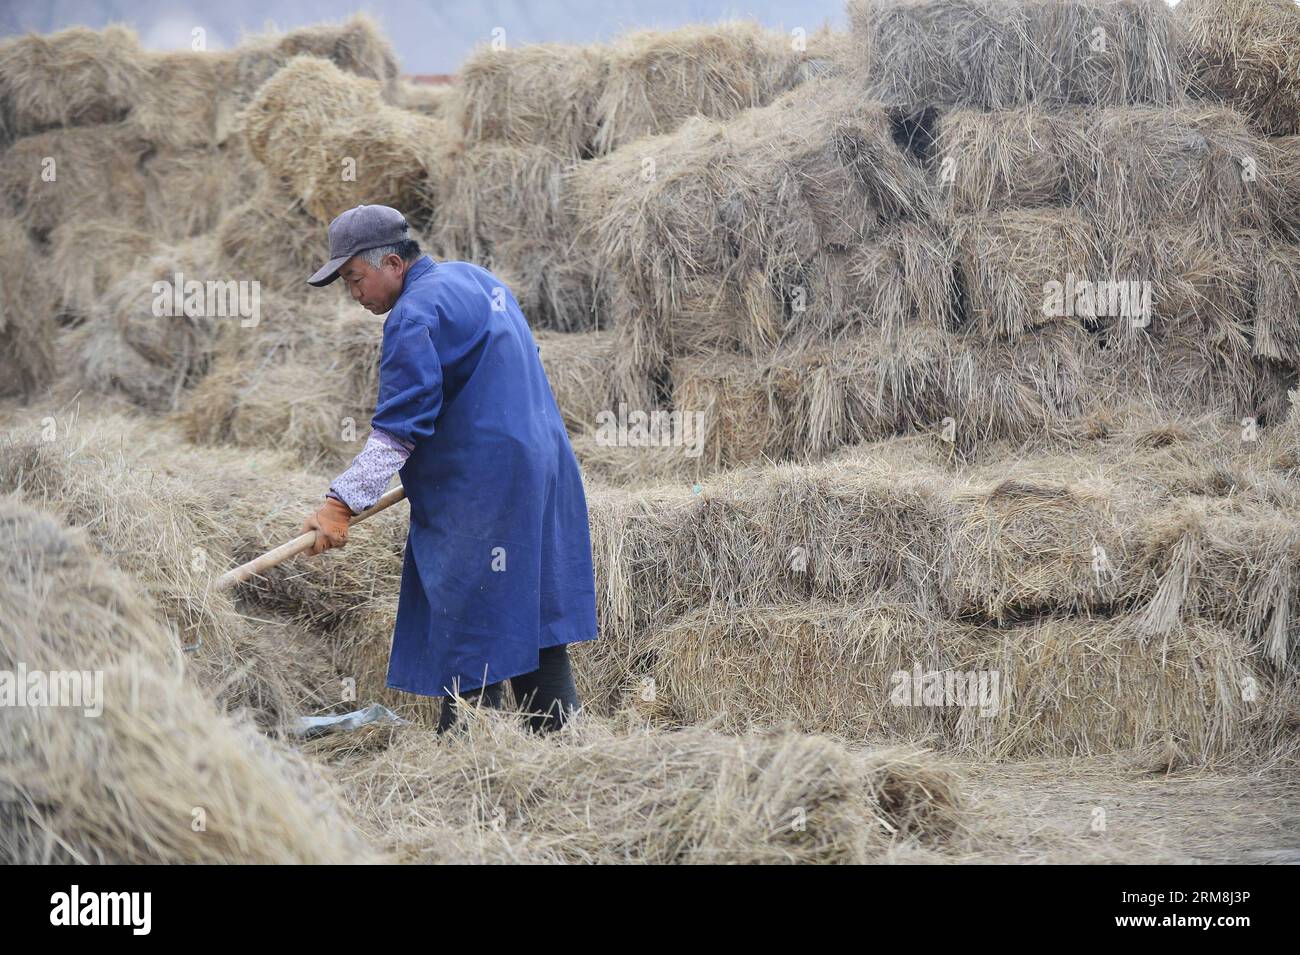 XINING, April 15, 2014 (Xinhua) -- A worker clears fodder grass at a breeding cooperative in Guide County of Hainan Tibetan Autonomous Prefecture in northwest China s Qinghai Province, April 15, 2014. Guide strived to develop its modern agricultural economy along the Yellow River, and it has become a key food source in Qinghai. (Xinhua/Wu Gang)(wjq) CHINA-QINGHAI-GUIDE COUNTY-AGRICULTURE (CN) PUBLICATIONxNOTxINxCHN   Xining April 15 2014 XINHUA a Worker clear fodder Graß AT a Breeding COOPERATIVE in Guide County of Hainan Tibetan Autonomous Prefecture in Northwest China S Qinghai Province Apri Stock Photo